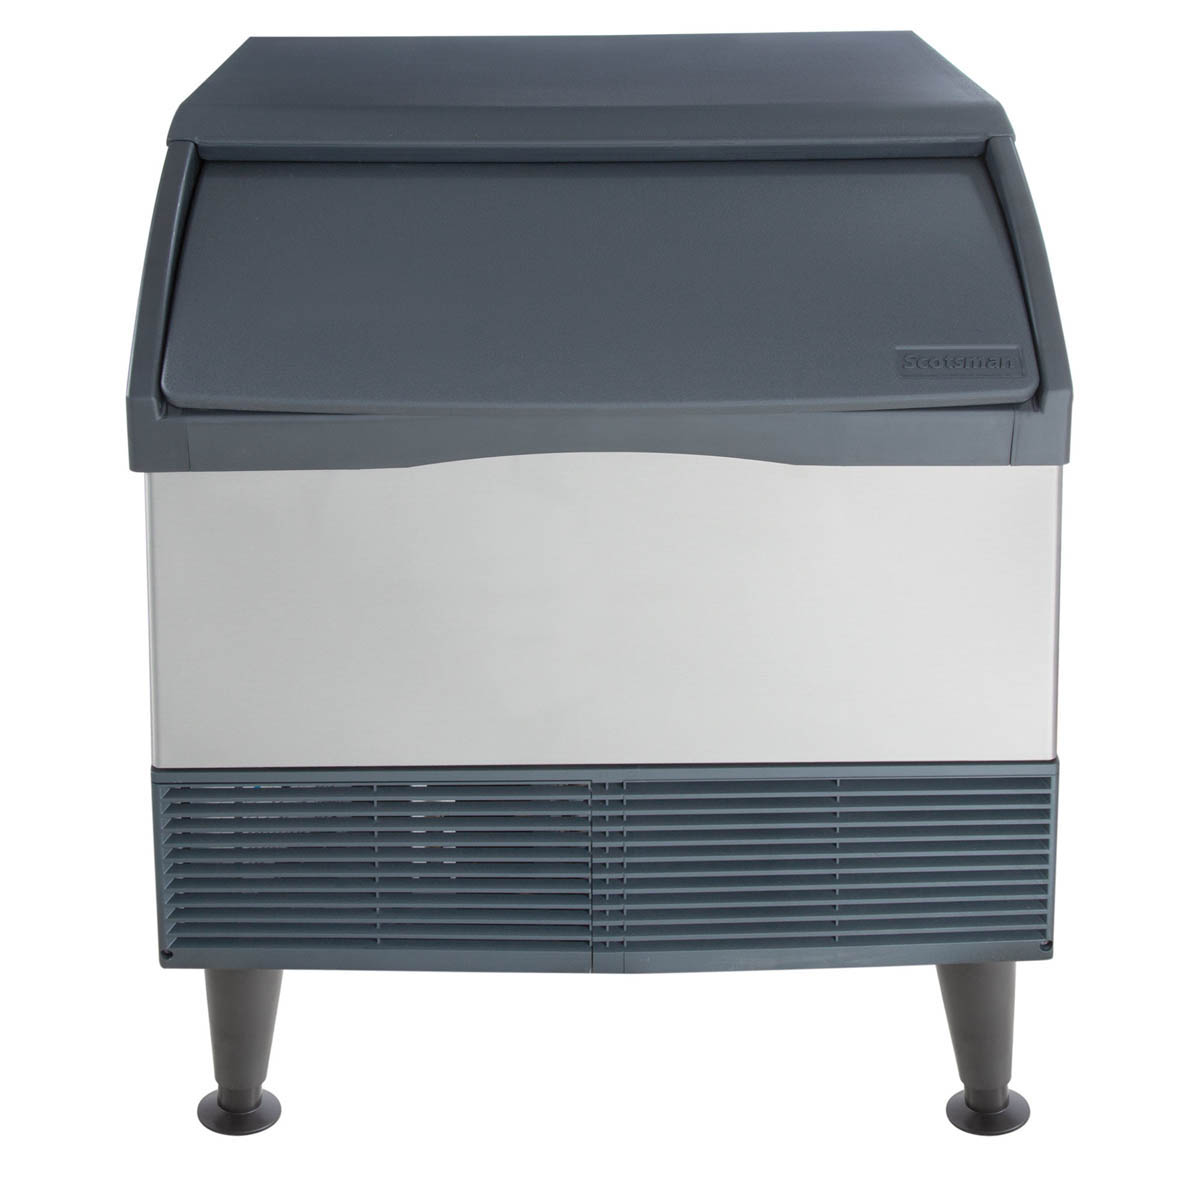 Scotsman CU3030MA-32 Self-Contained Under Counter Cuber with Storage, Chef's Deal